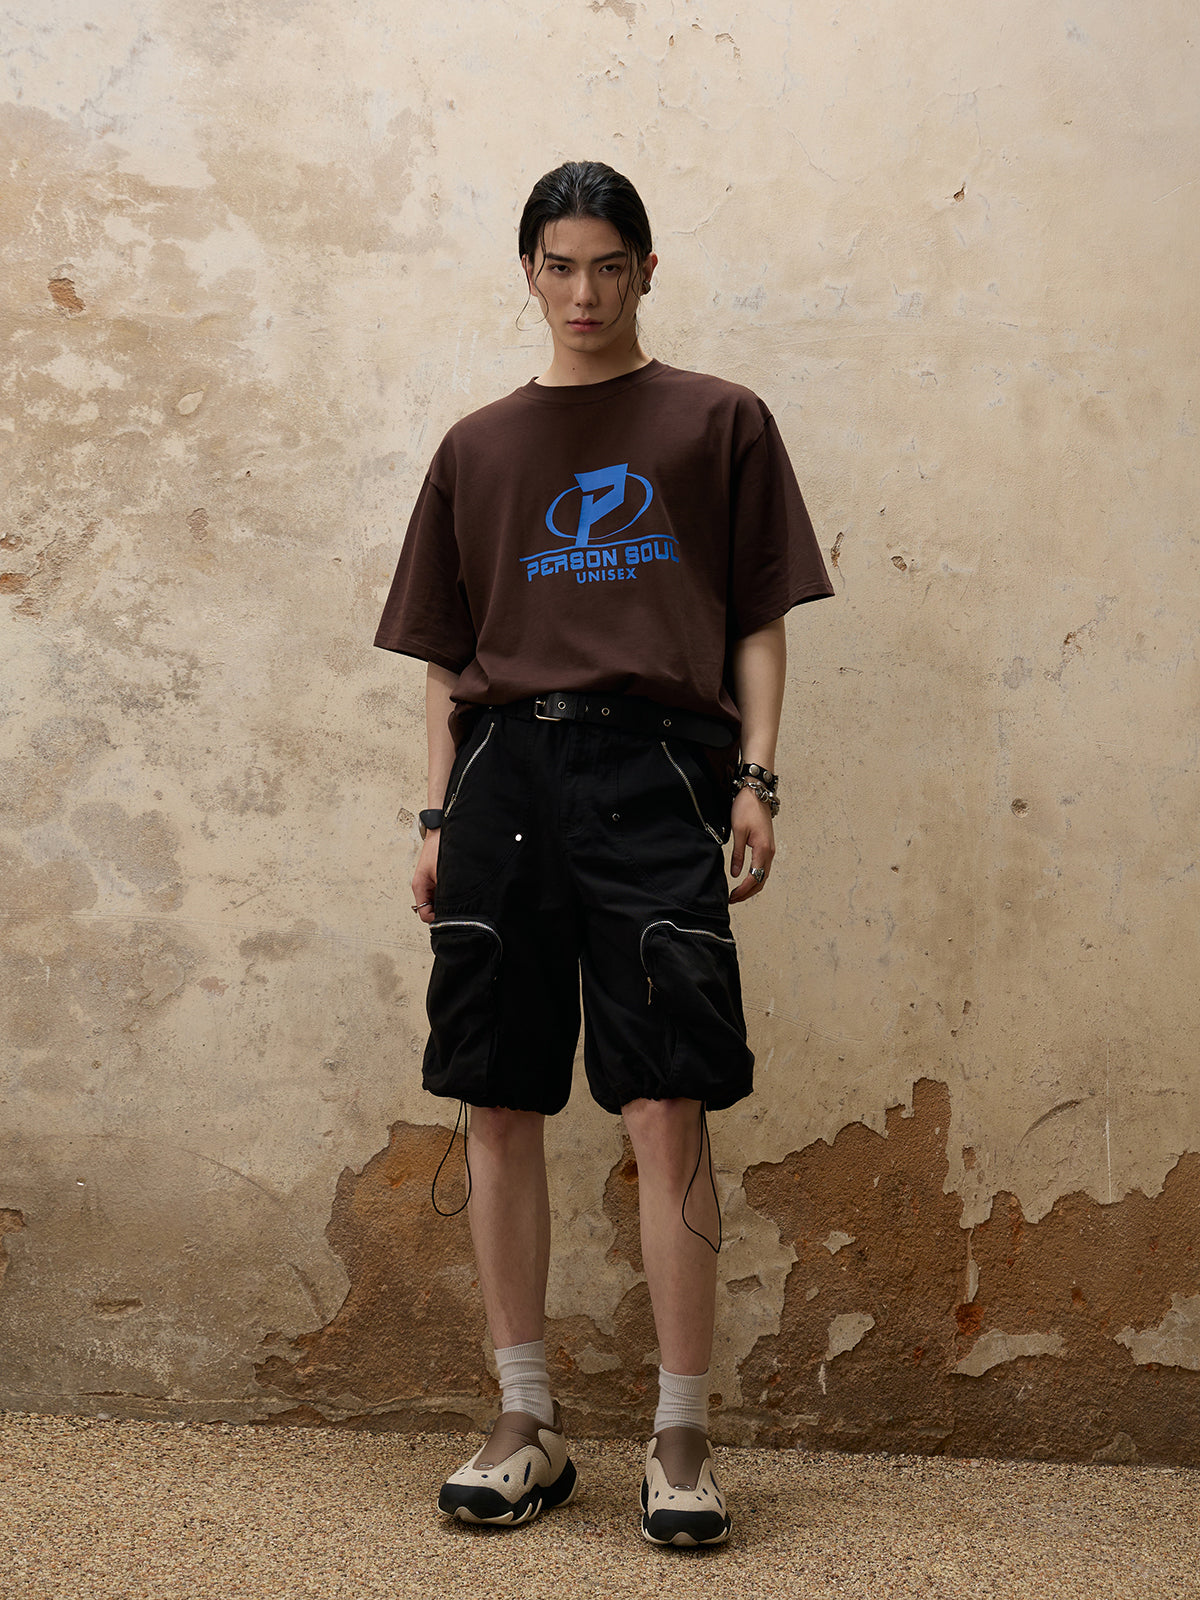 Personsoul Relaxed Logo Tee – personsoul